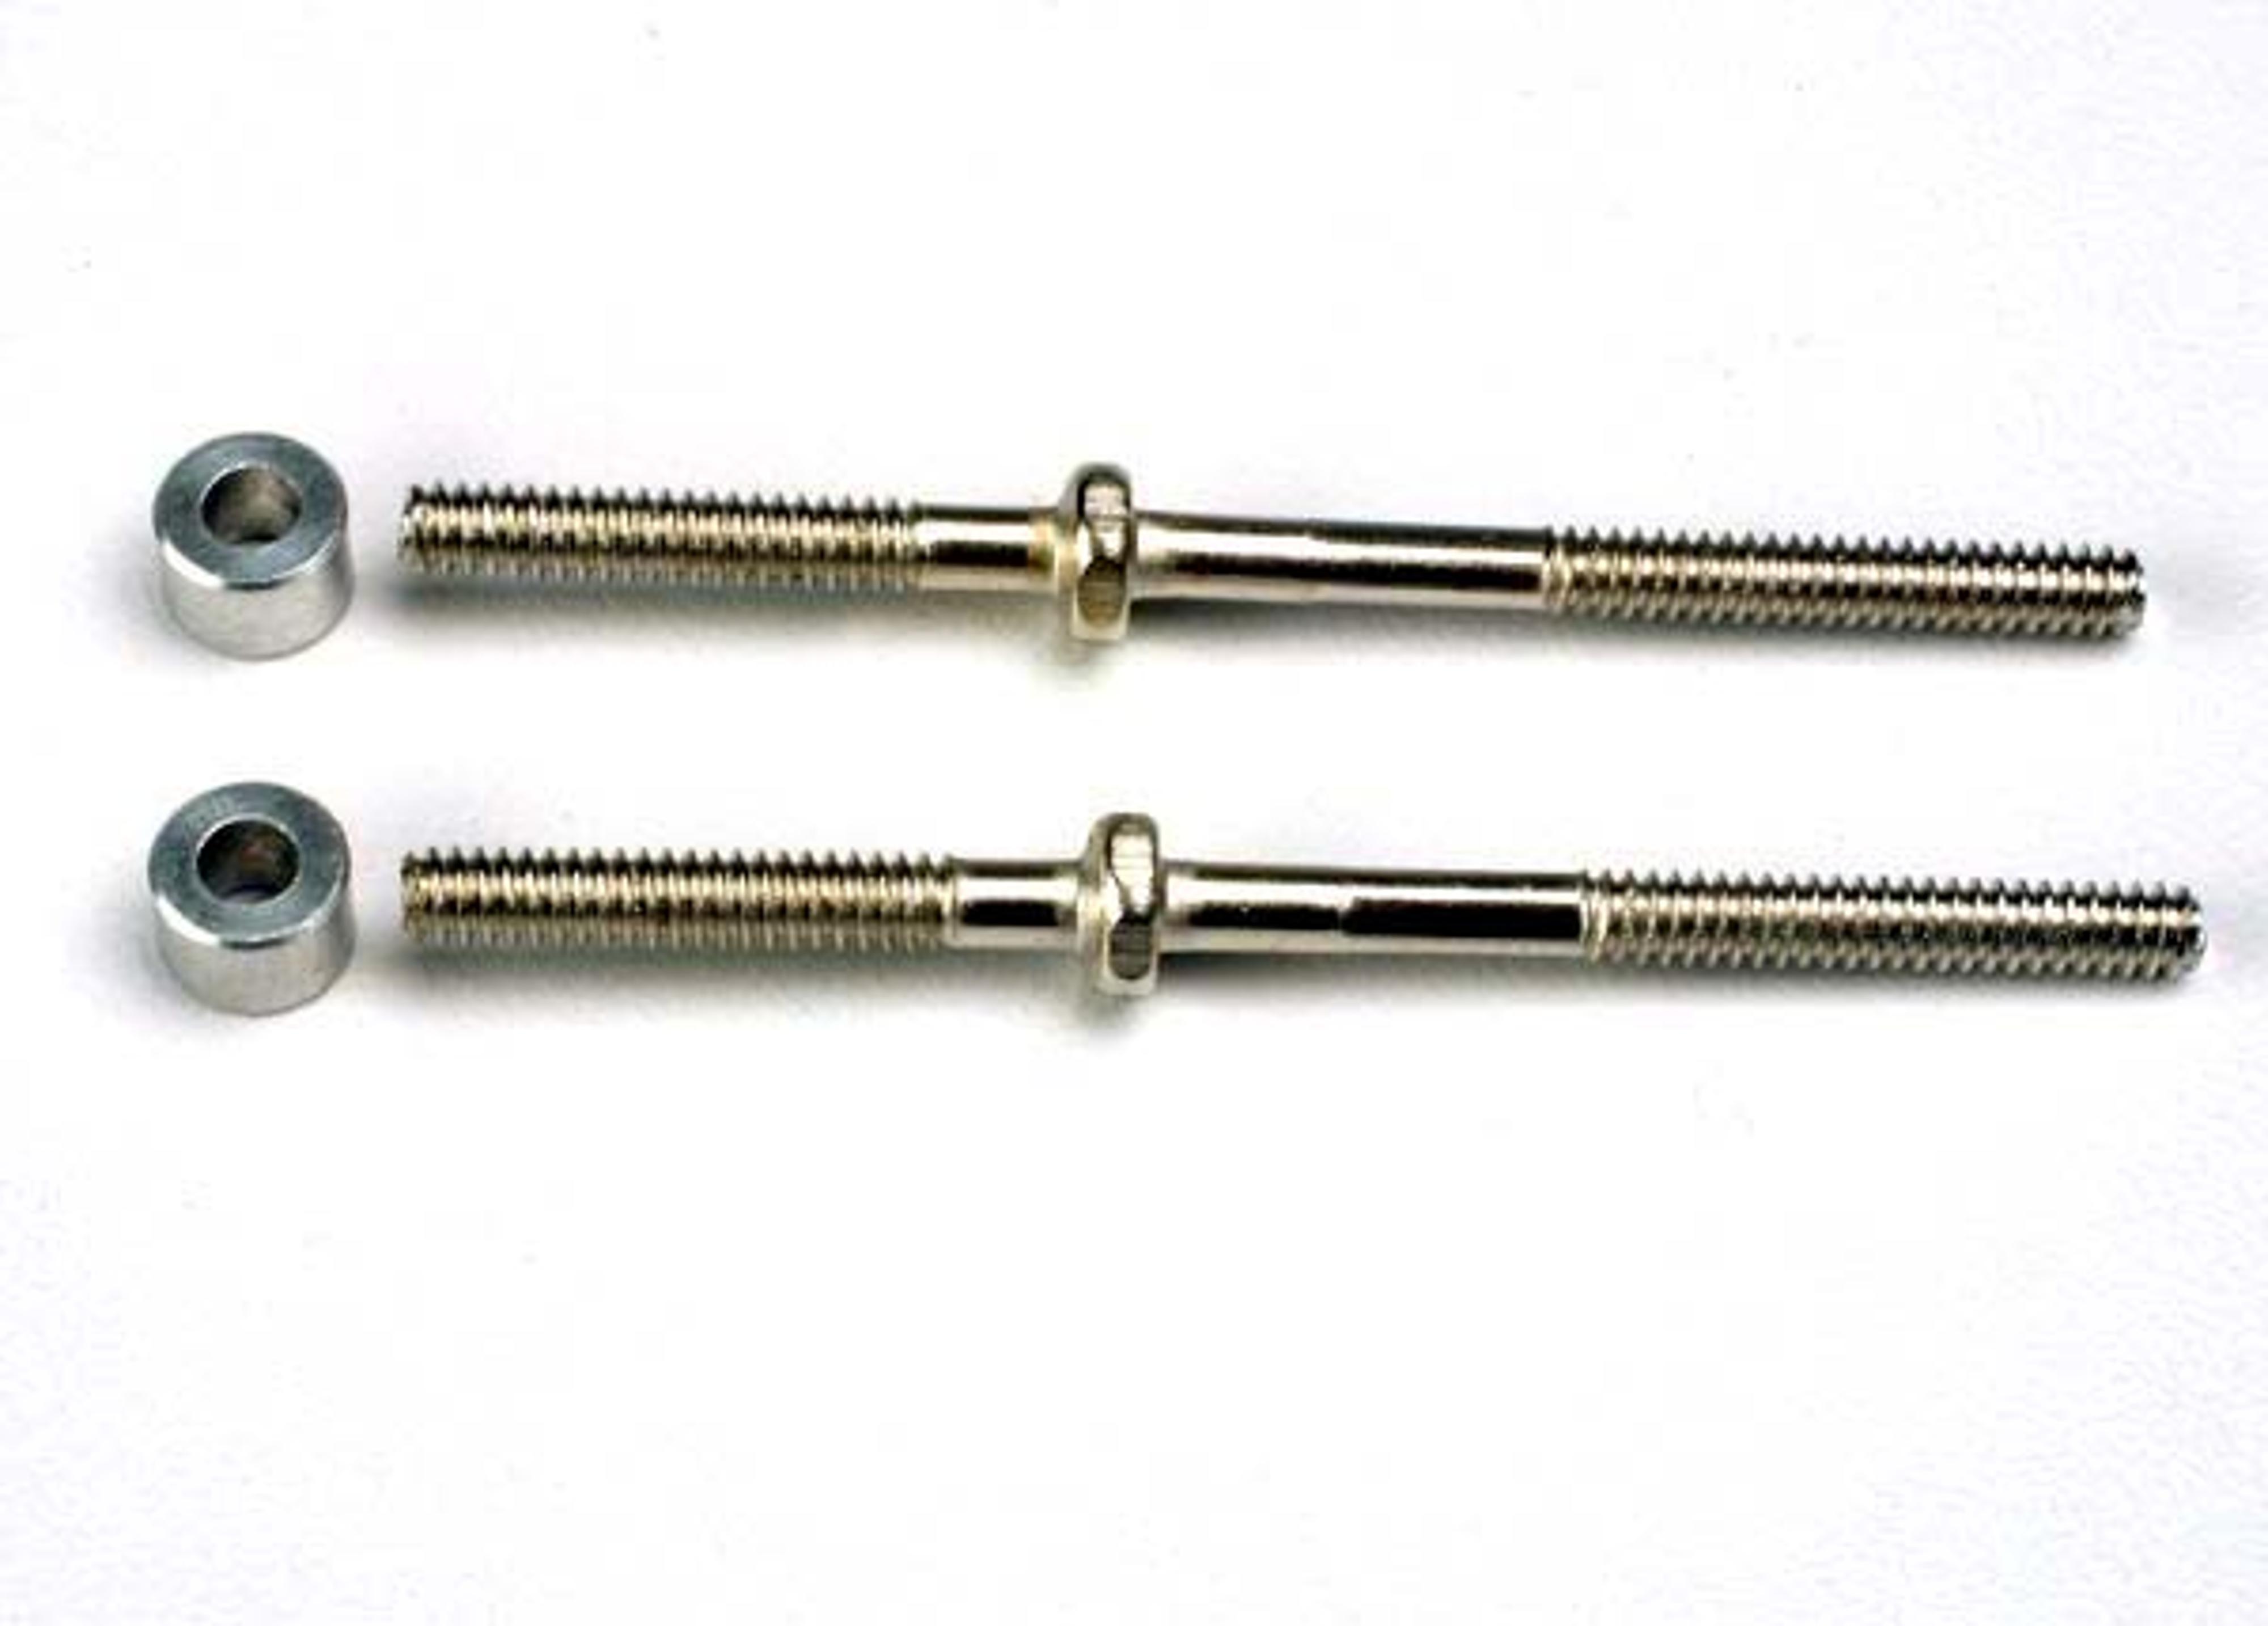 Traxxas RC Turnbuckles 54mm / 3x6x4mm Aluminum Spacers (Rear Camber Links)